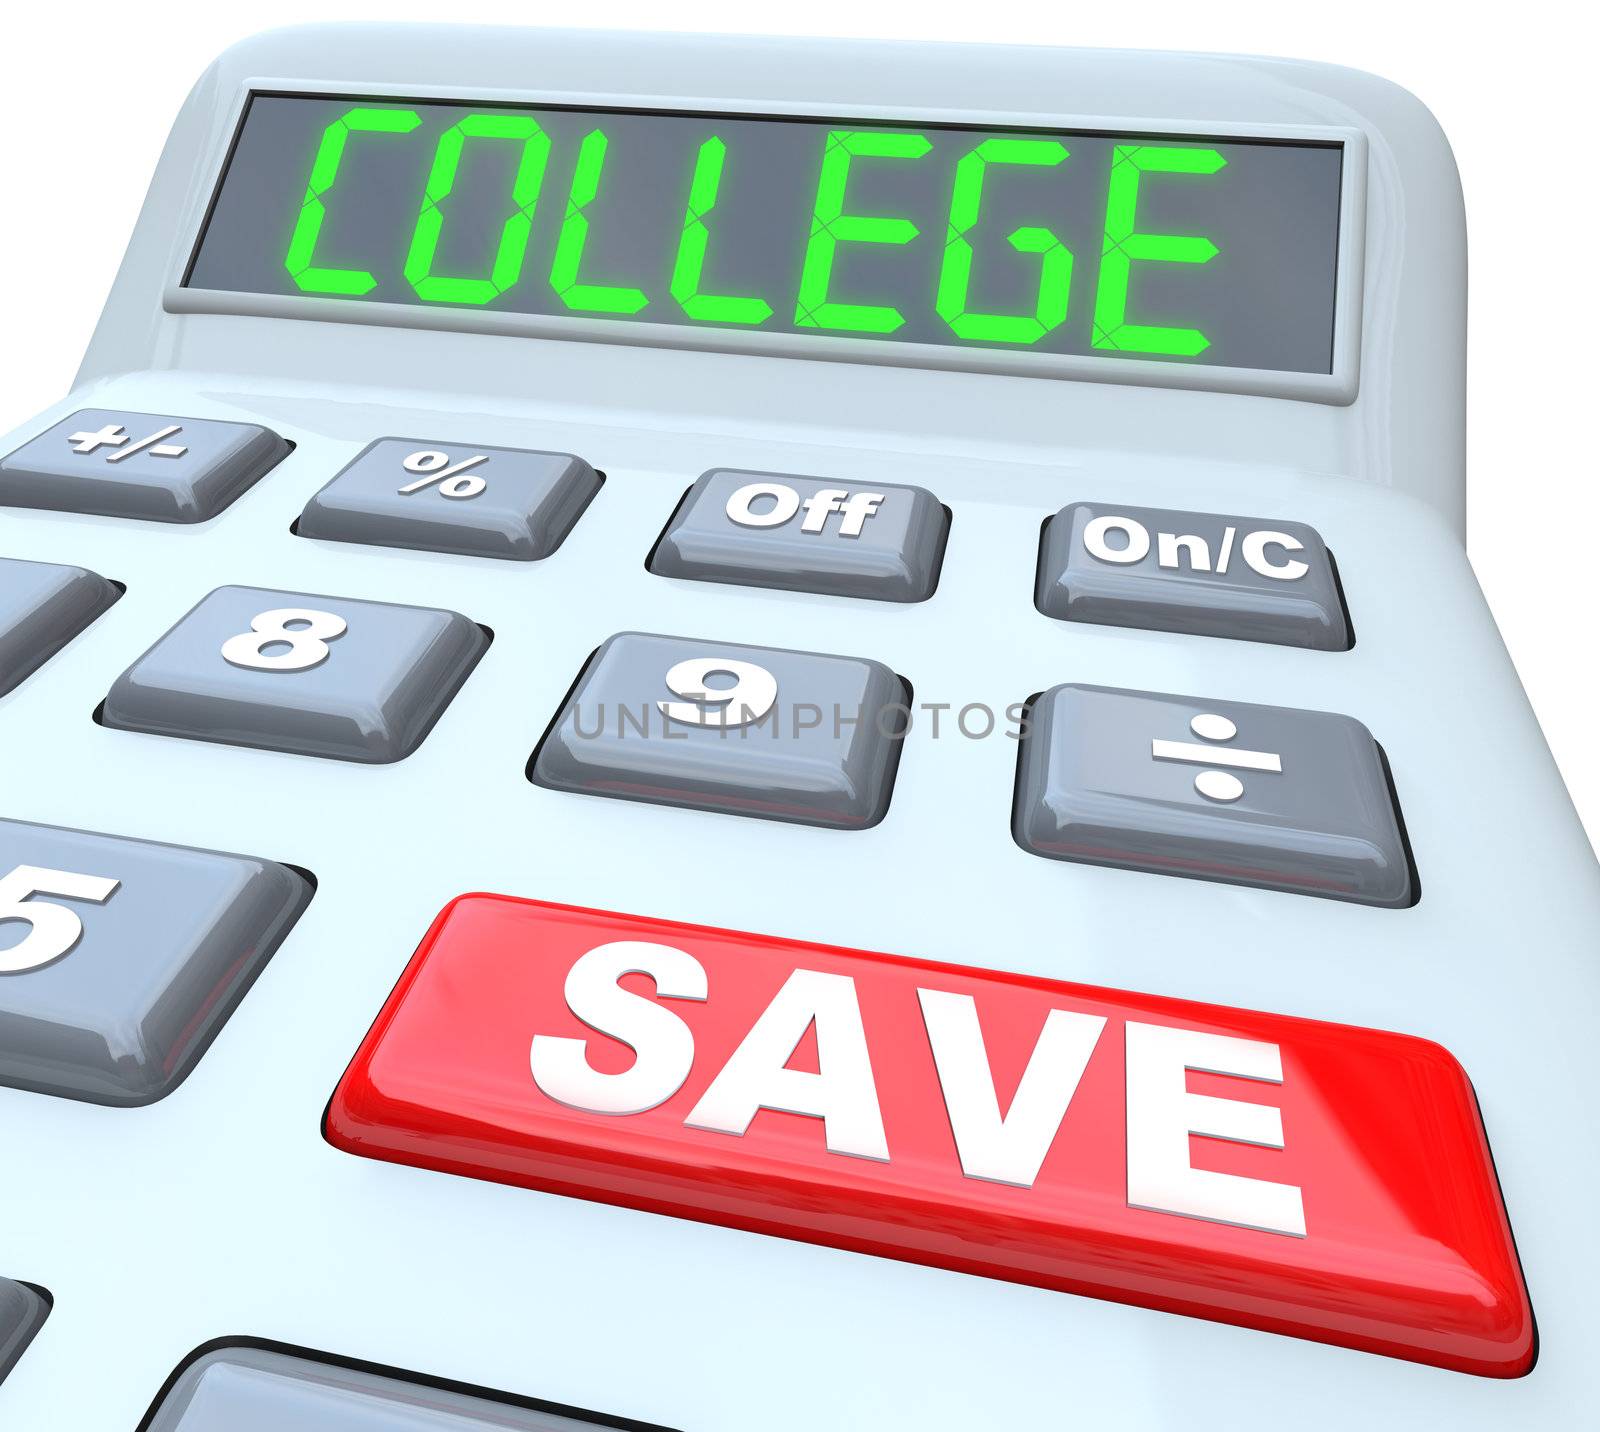 Save for College is the message on this calculator displaying the words to encourage you to increase your savings to pay for your or your children's future education to earn an advanced school degree